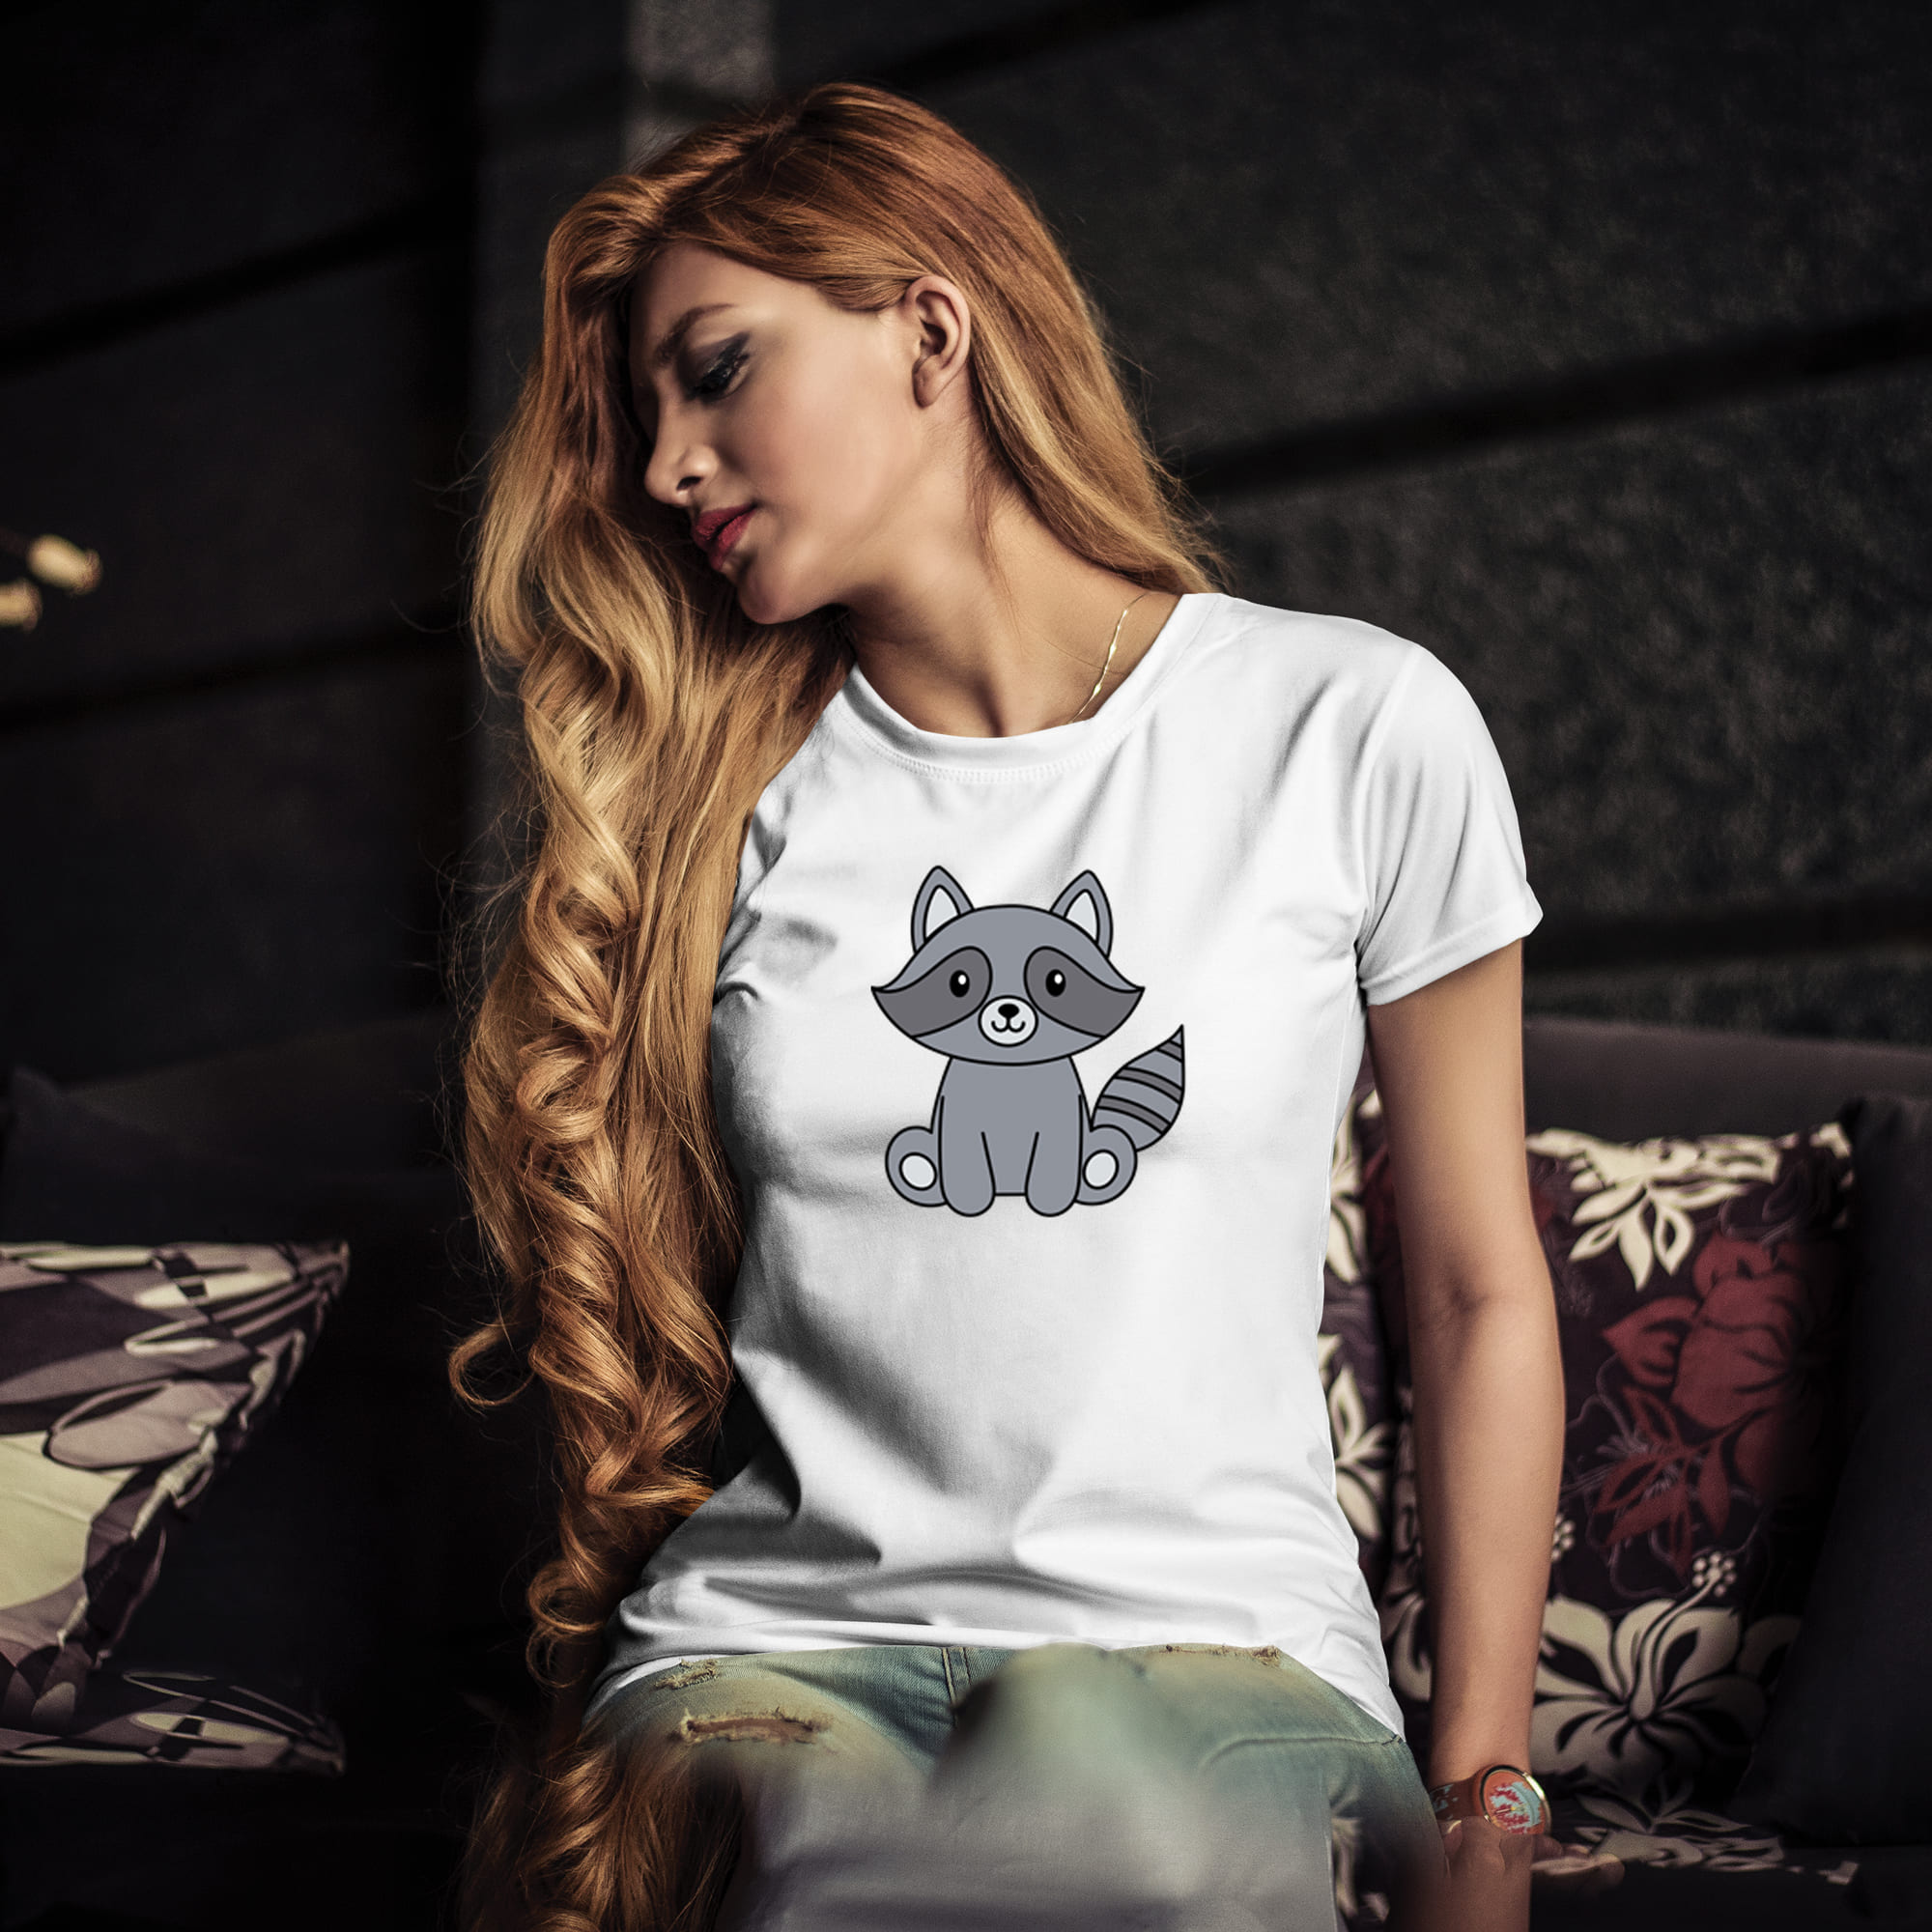 Woman sitting on a couch wearing a t - shirt with a raccoon.